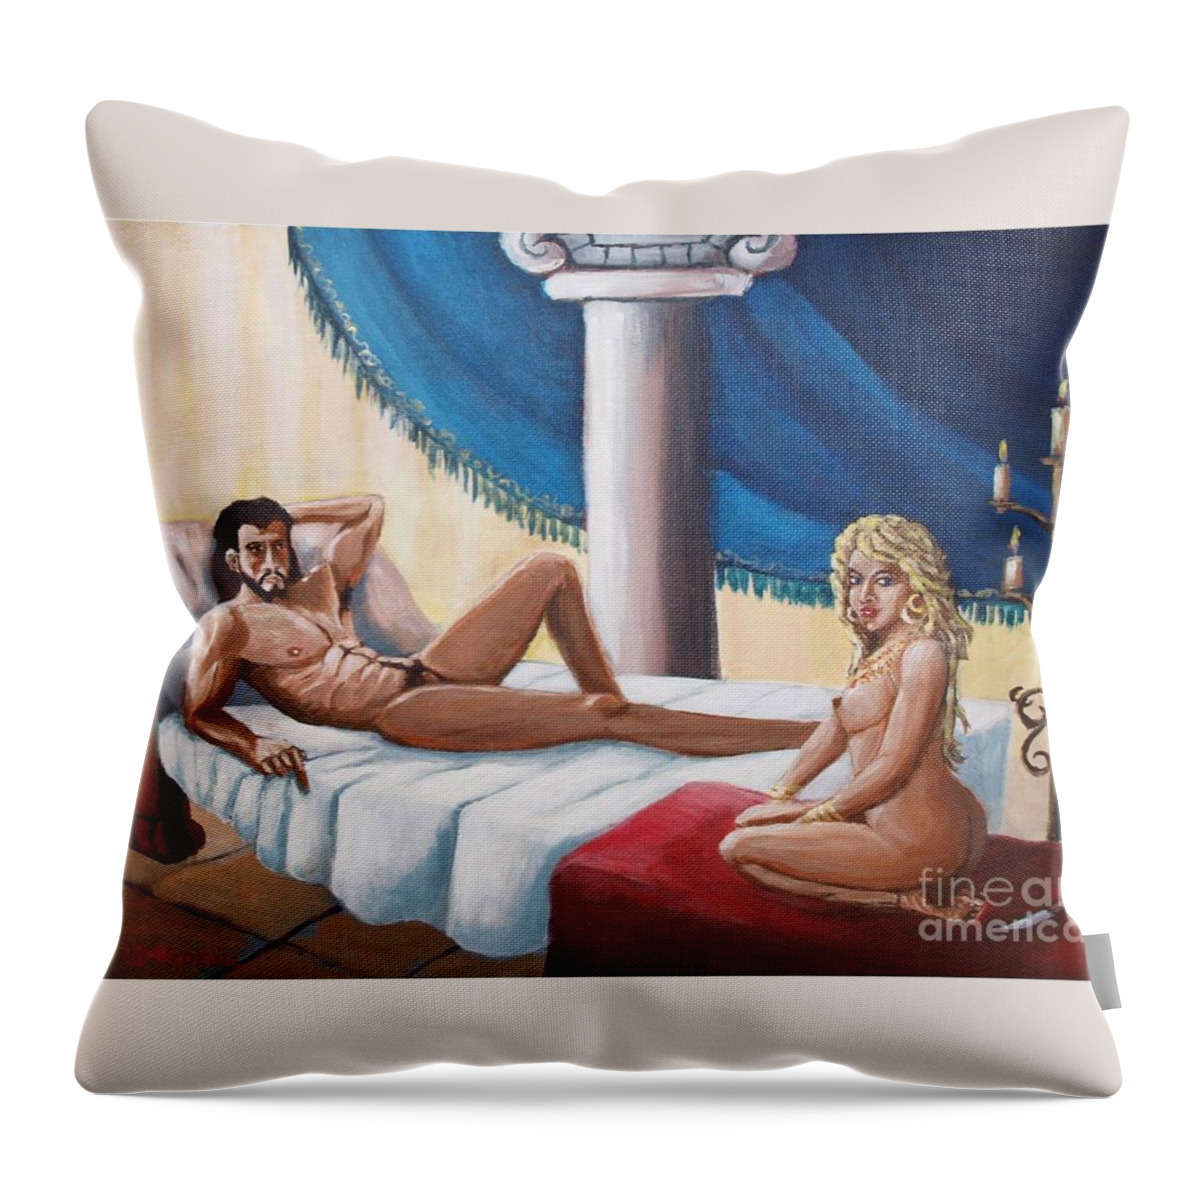 Samson Throw Pillow featuring the painting Samson and Delilah by Jean Pierre Bergoeing